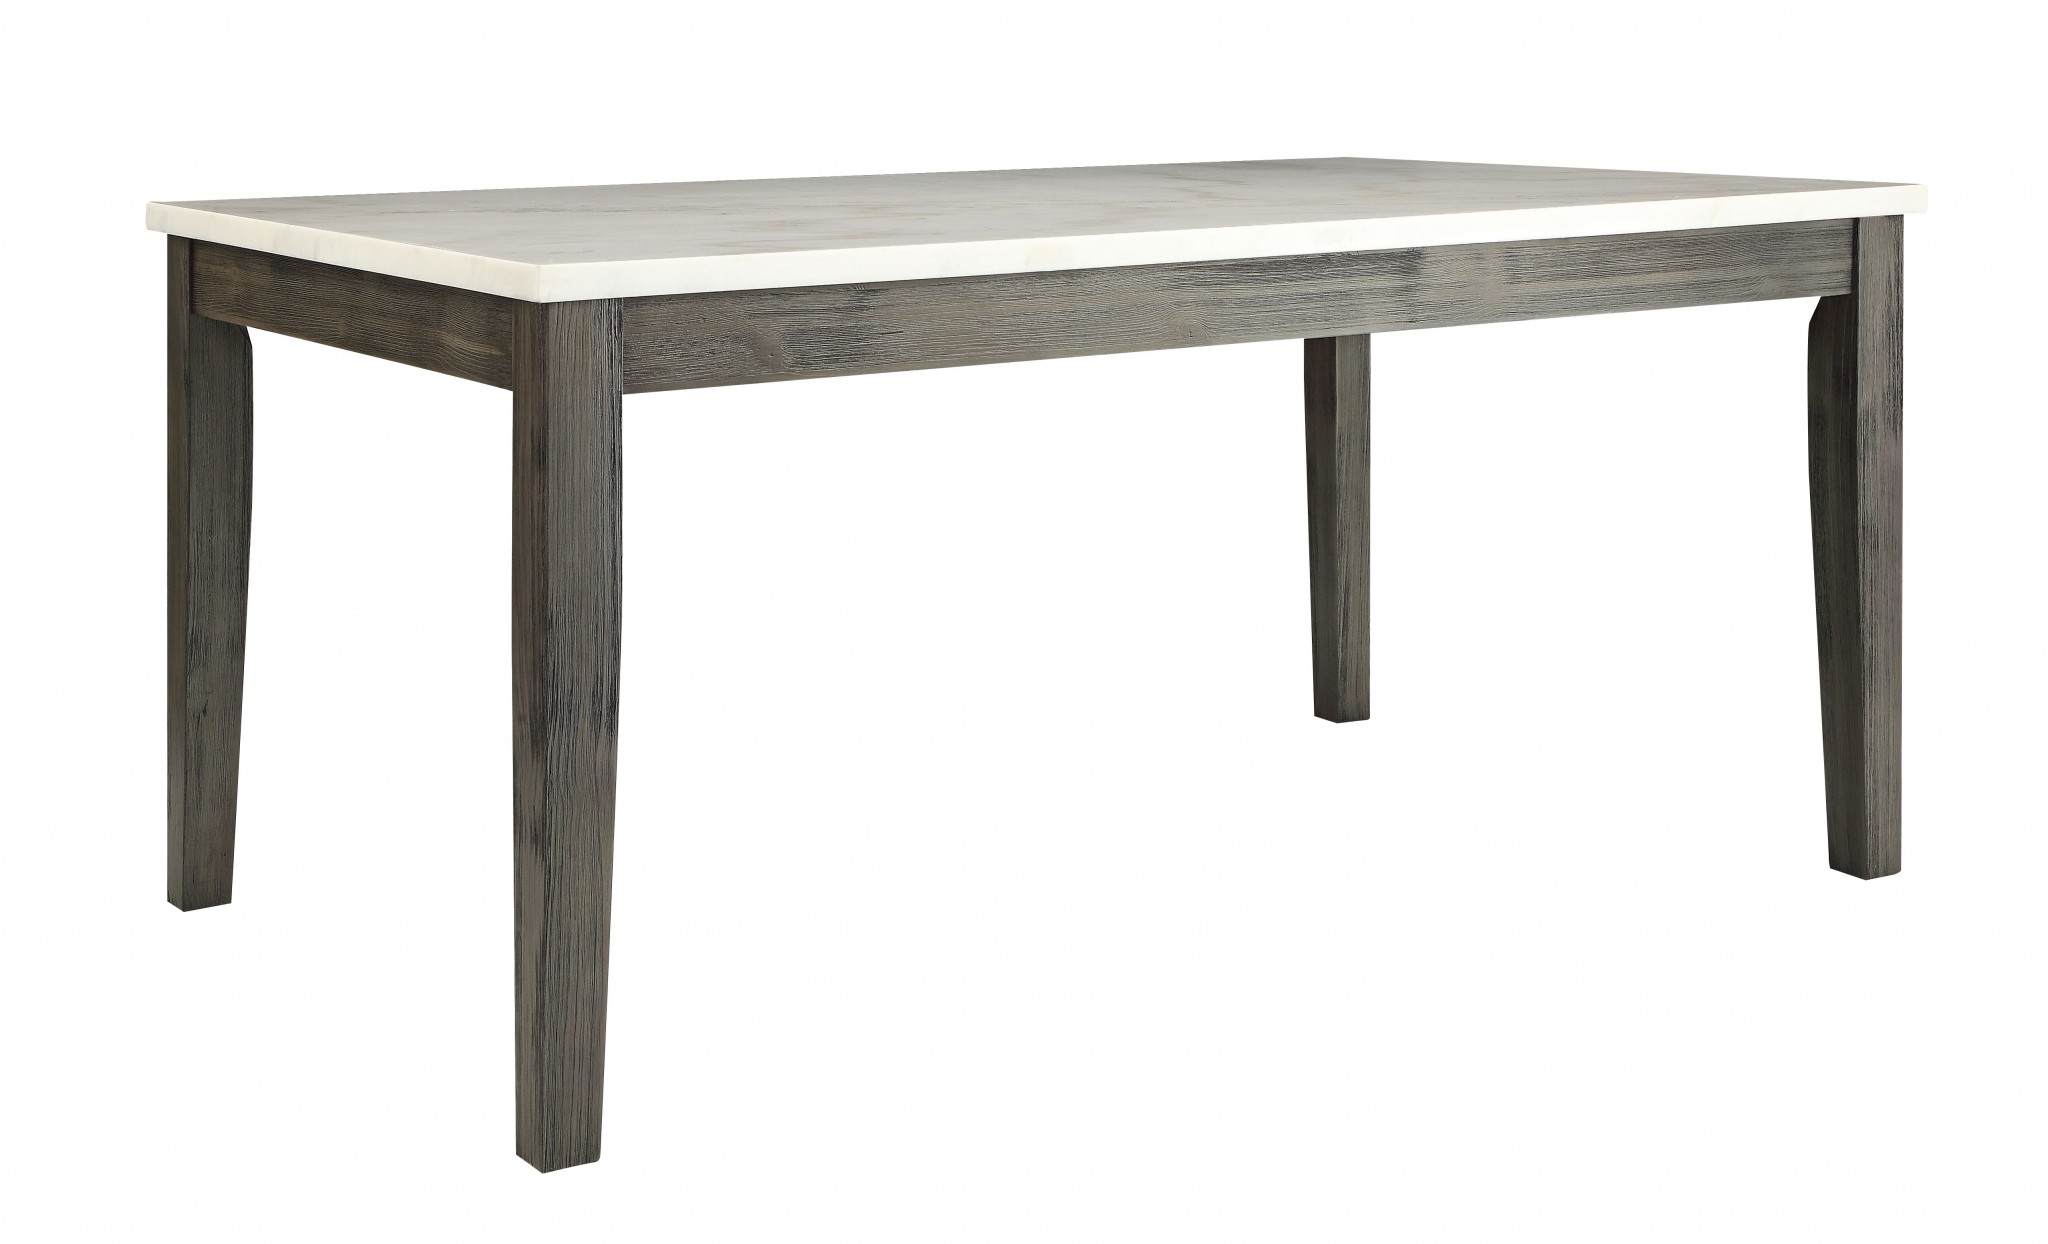 64" X 38" X 30" White Marble And Gray Oak Dining Table